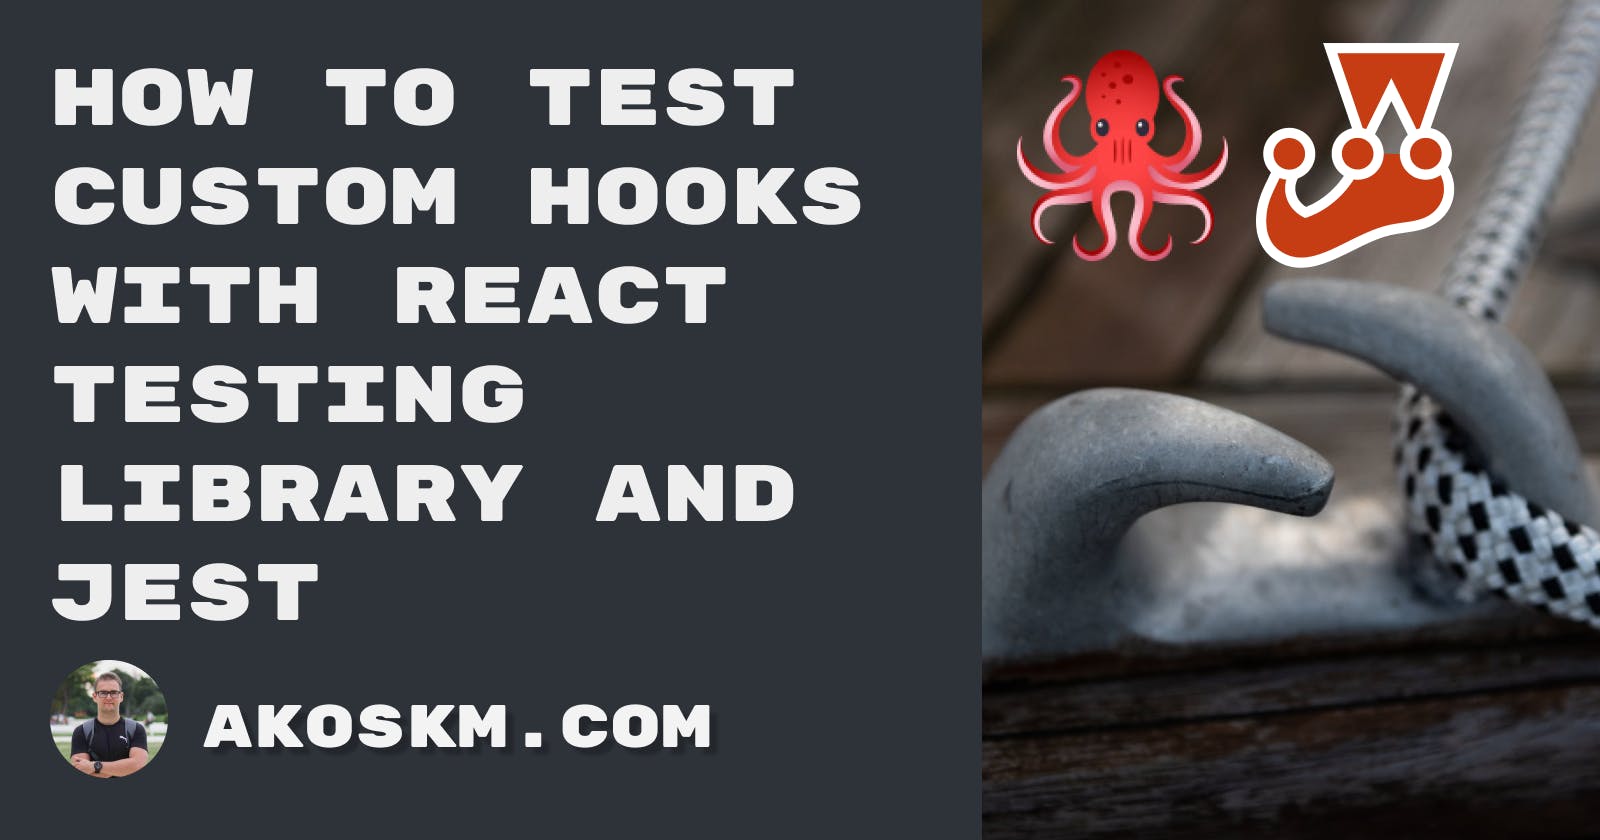 How to Test Custom Hooks with React Testing Library and Jest